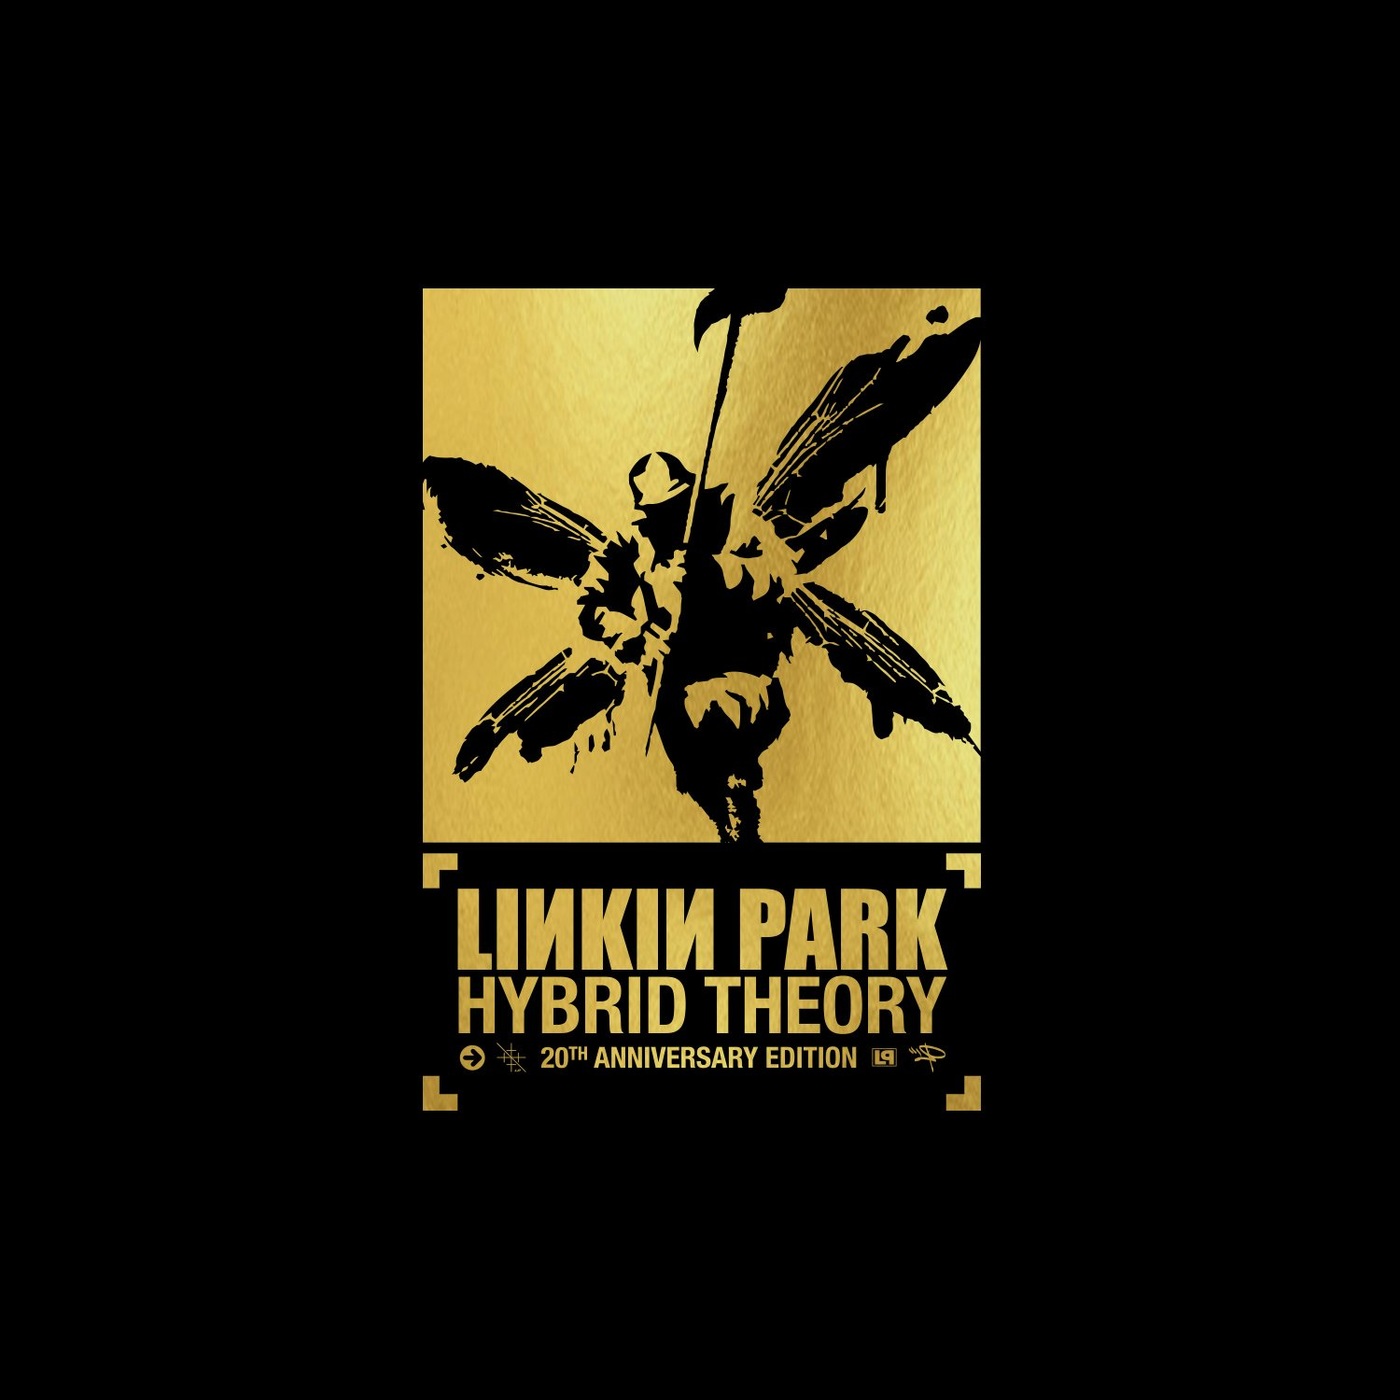 Art for In the End (demo) by Linkin Park